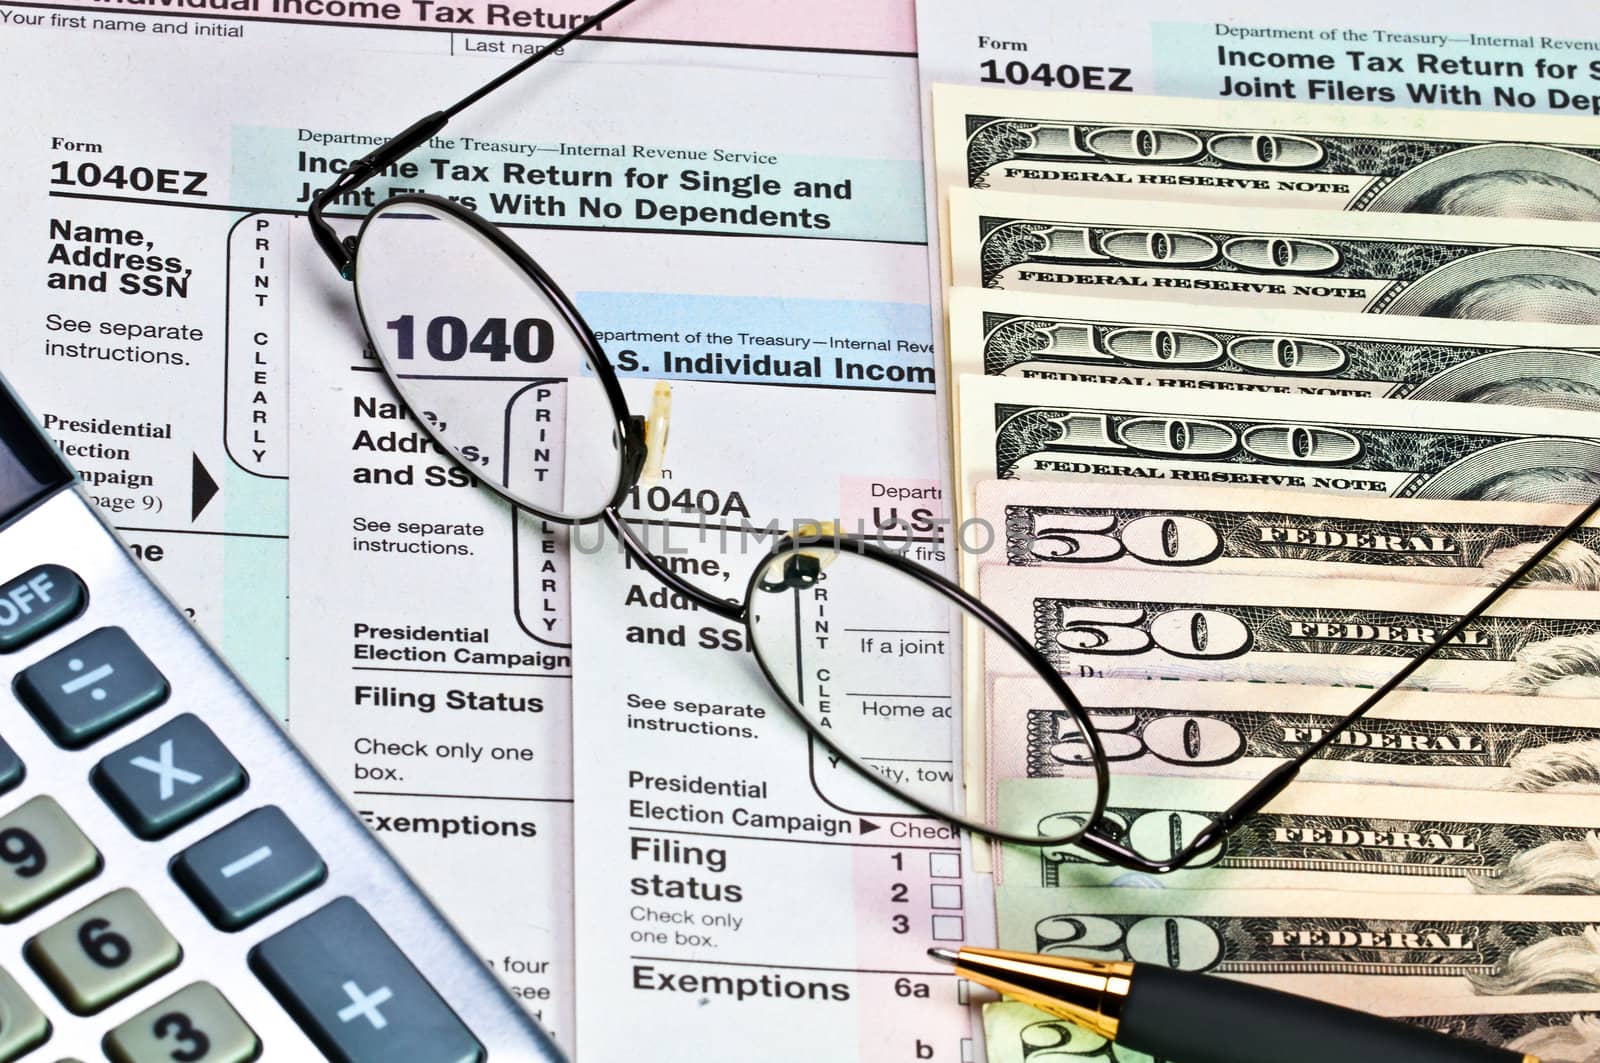 Tax forms 1040 with pen, glasses, calculator and money.